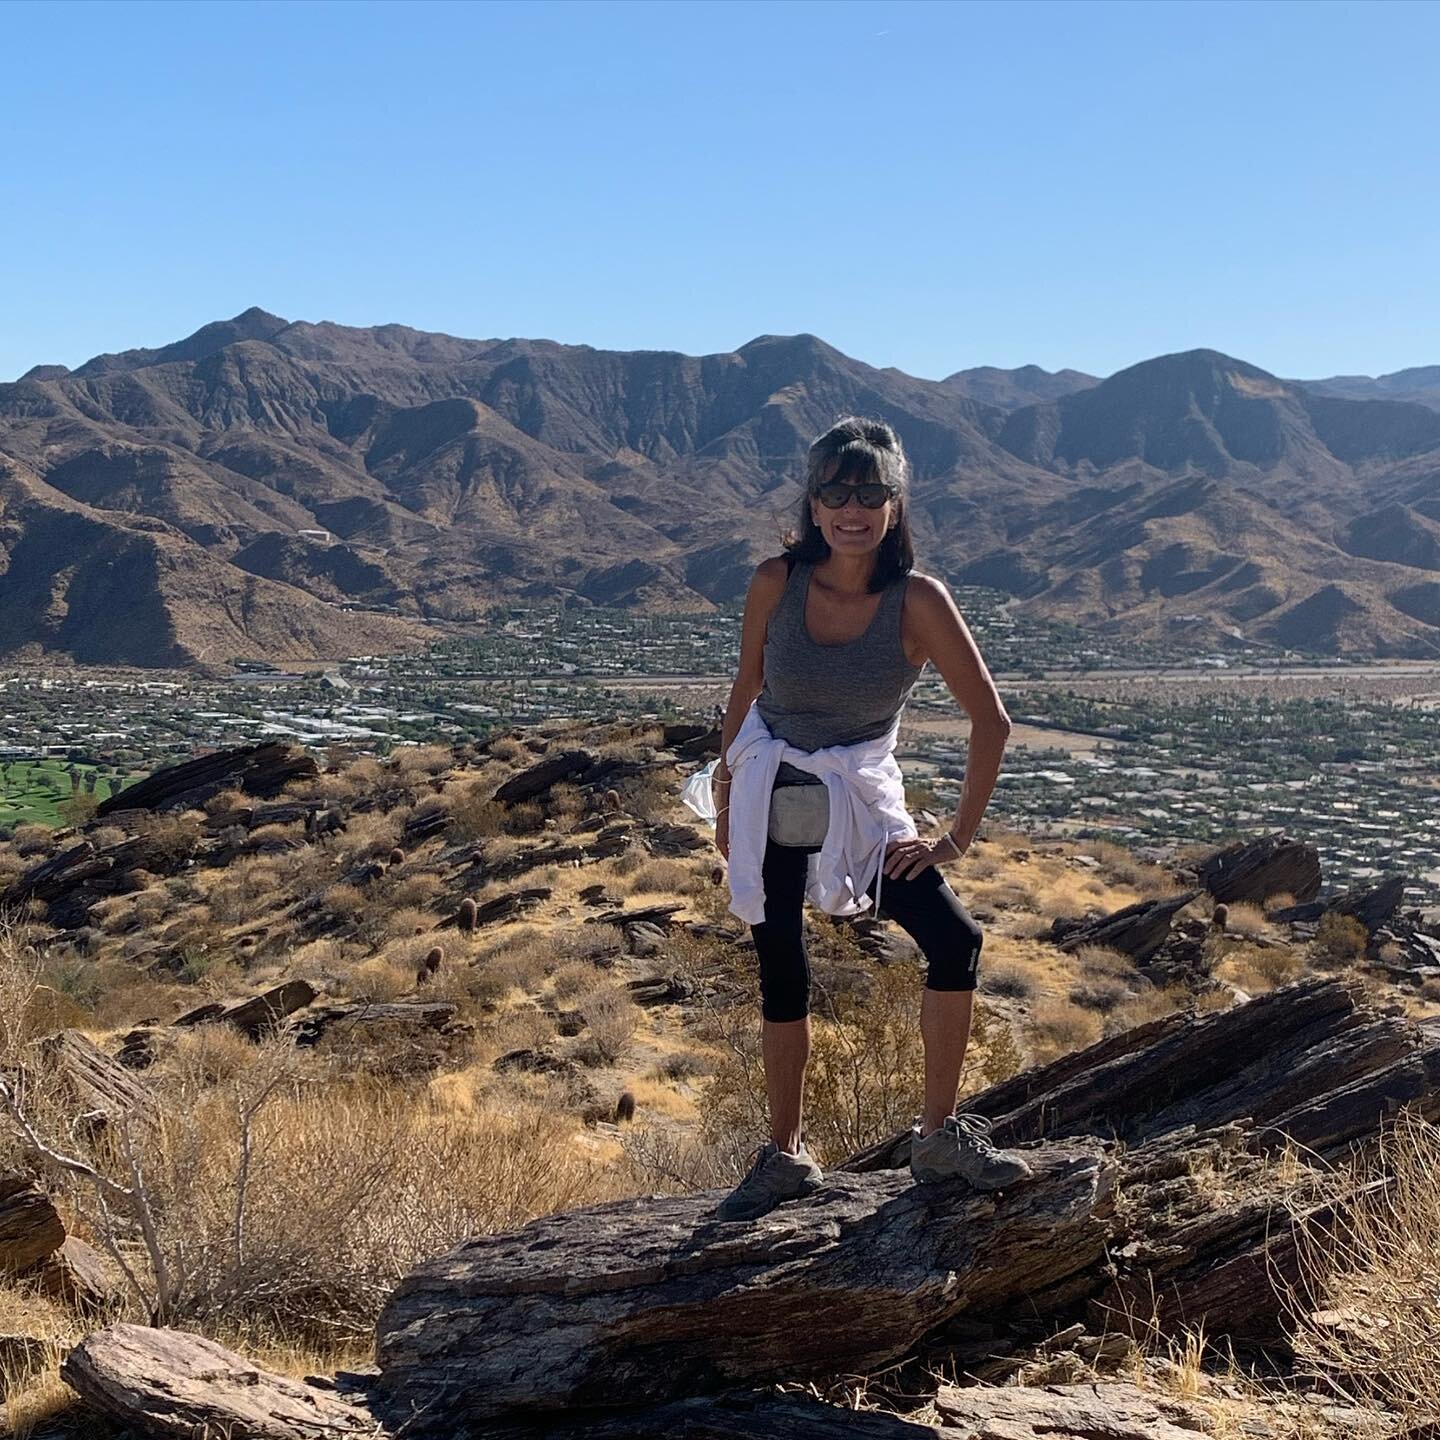 Just loving the outdoors to keep me grounded during these trying time... #lovemyhikes🥾#keepsmegrounded #bodymindandsoul #loveyougrandma❤️ #trustrelaxbreathe